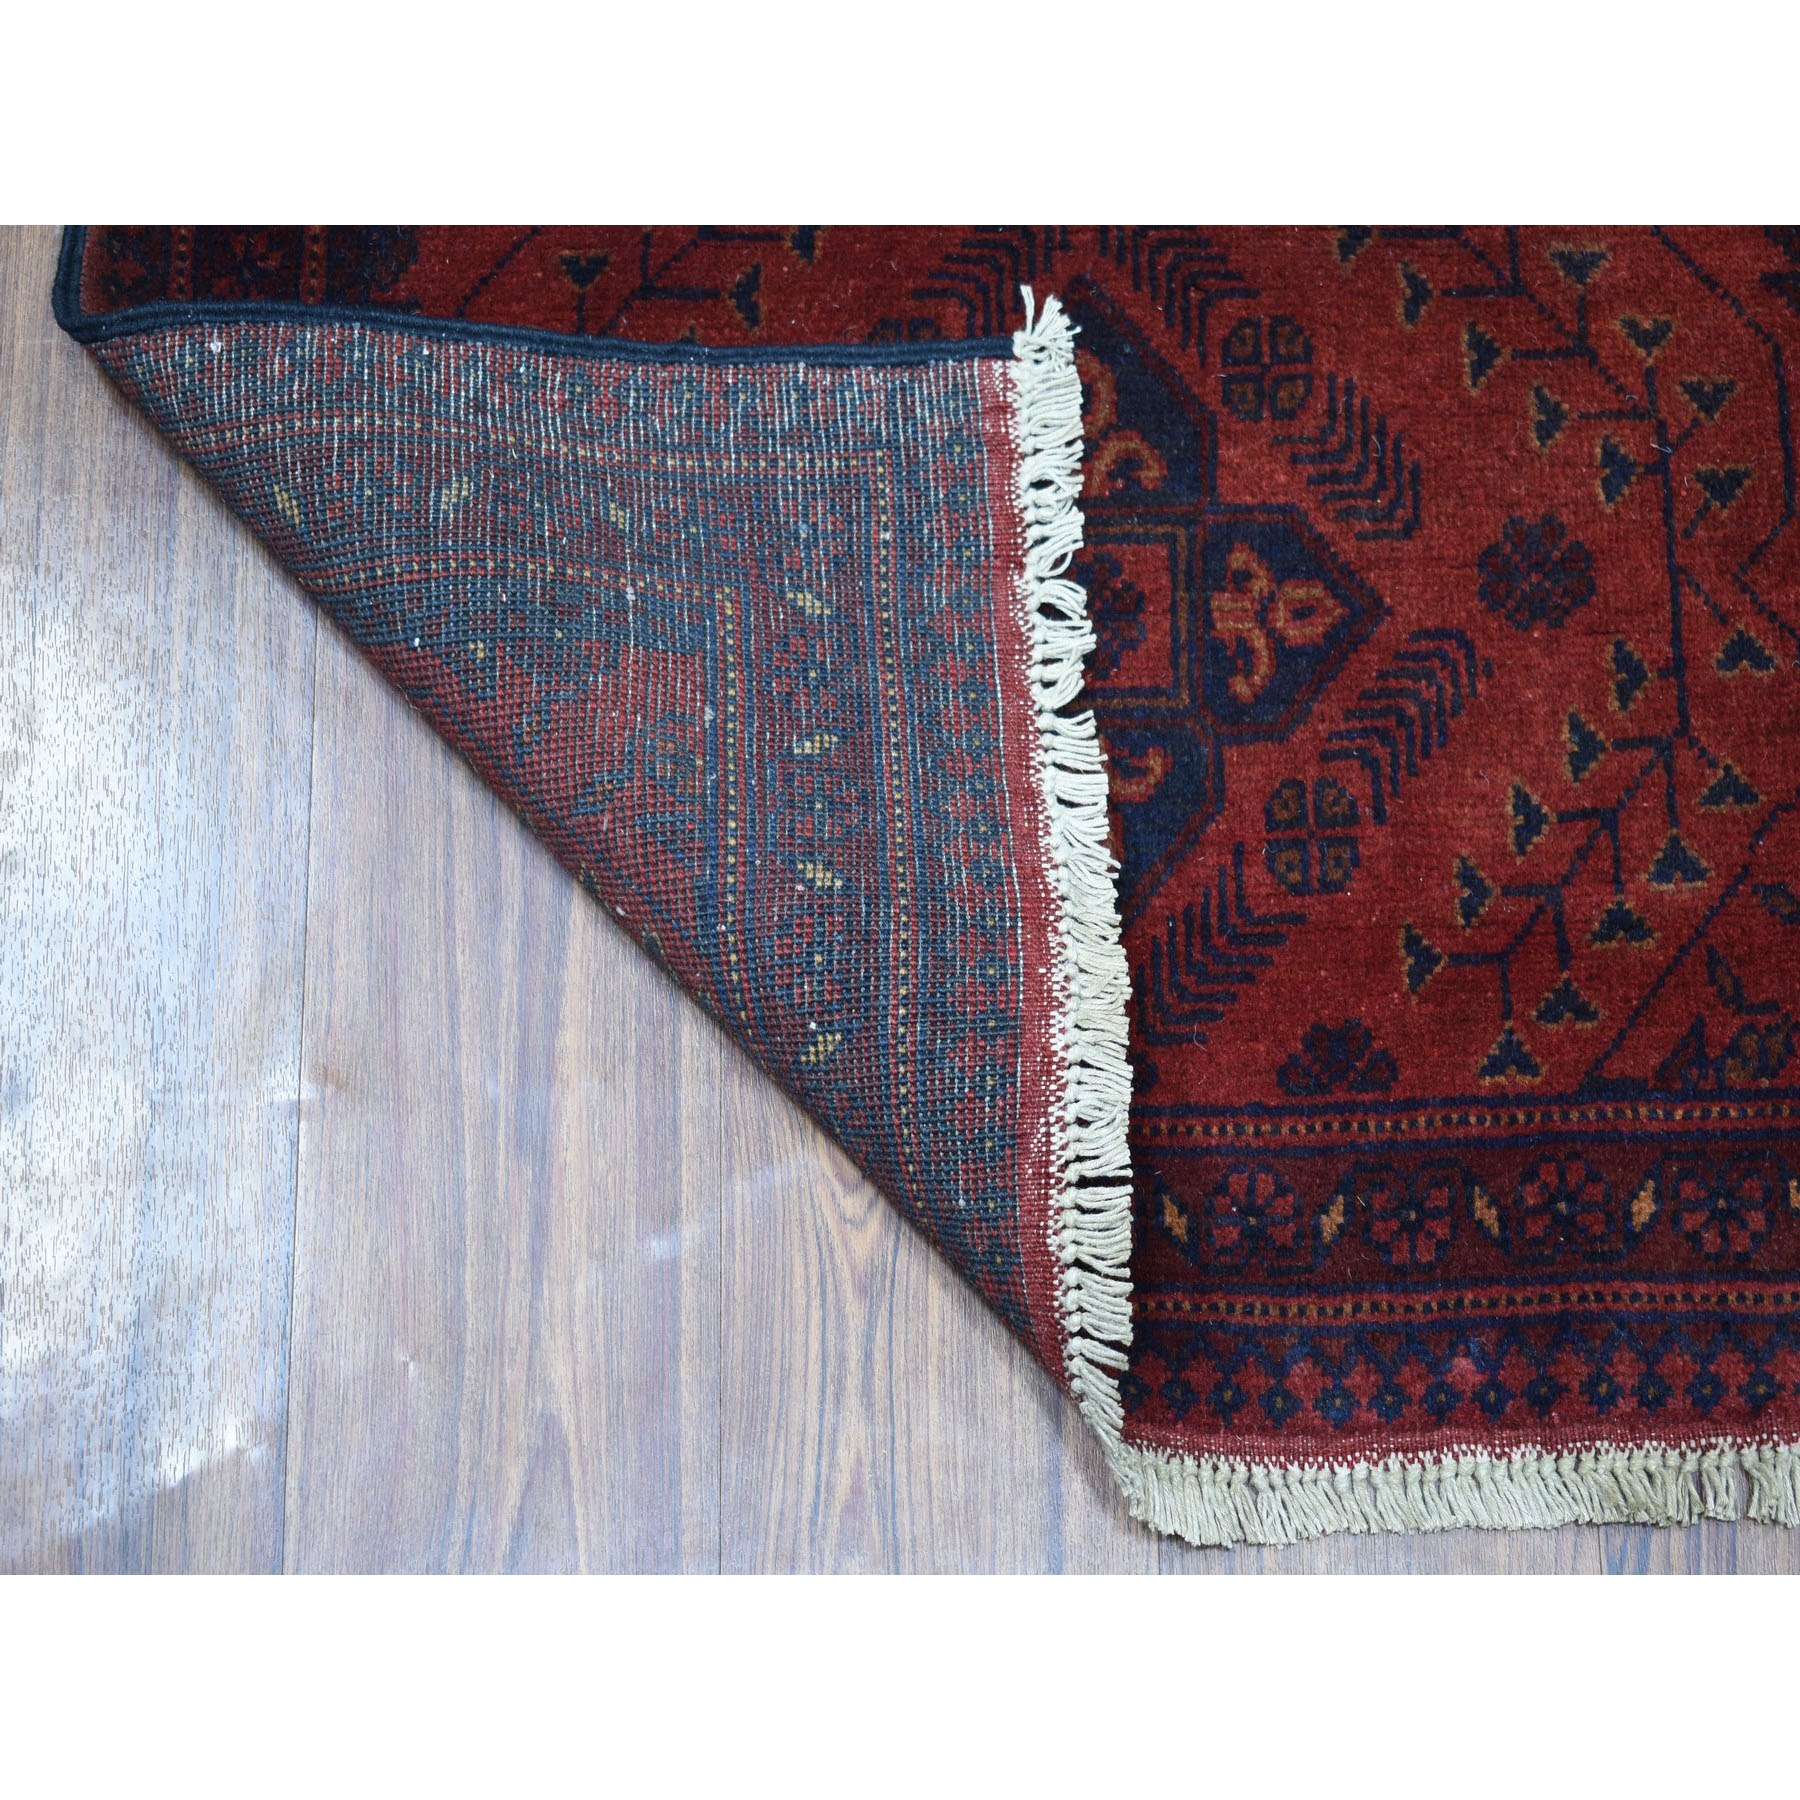 2-6 x6-1  Deep and Saturated Red Geometric Afghan Andkhoy Runner Pure Wool Hand Knotted Oriental Rug 